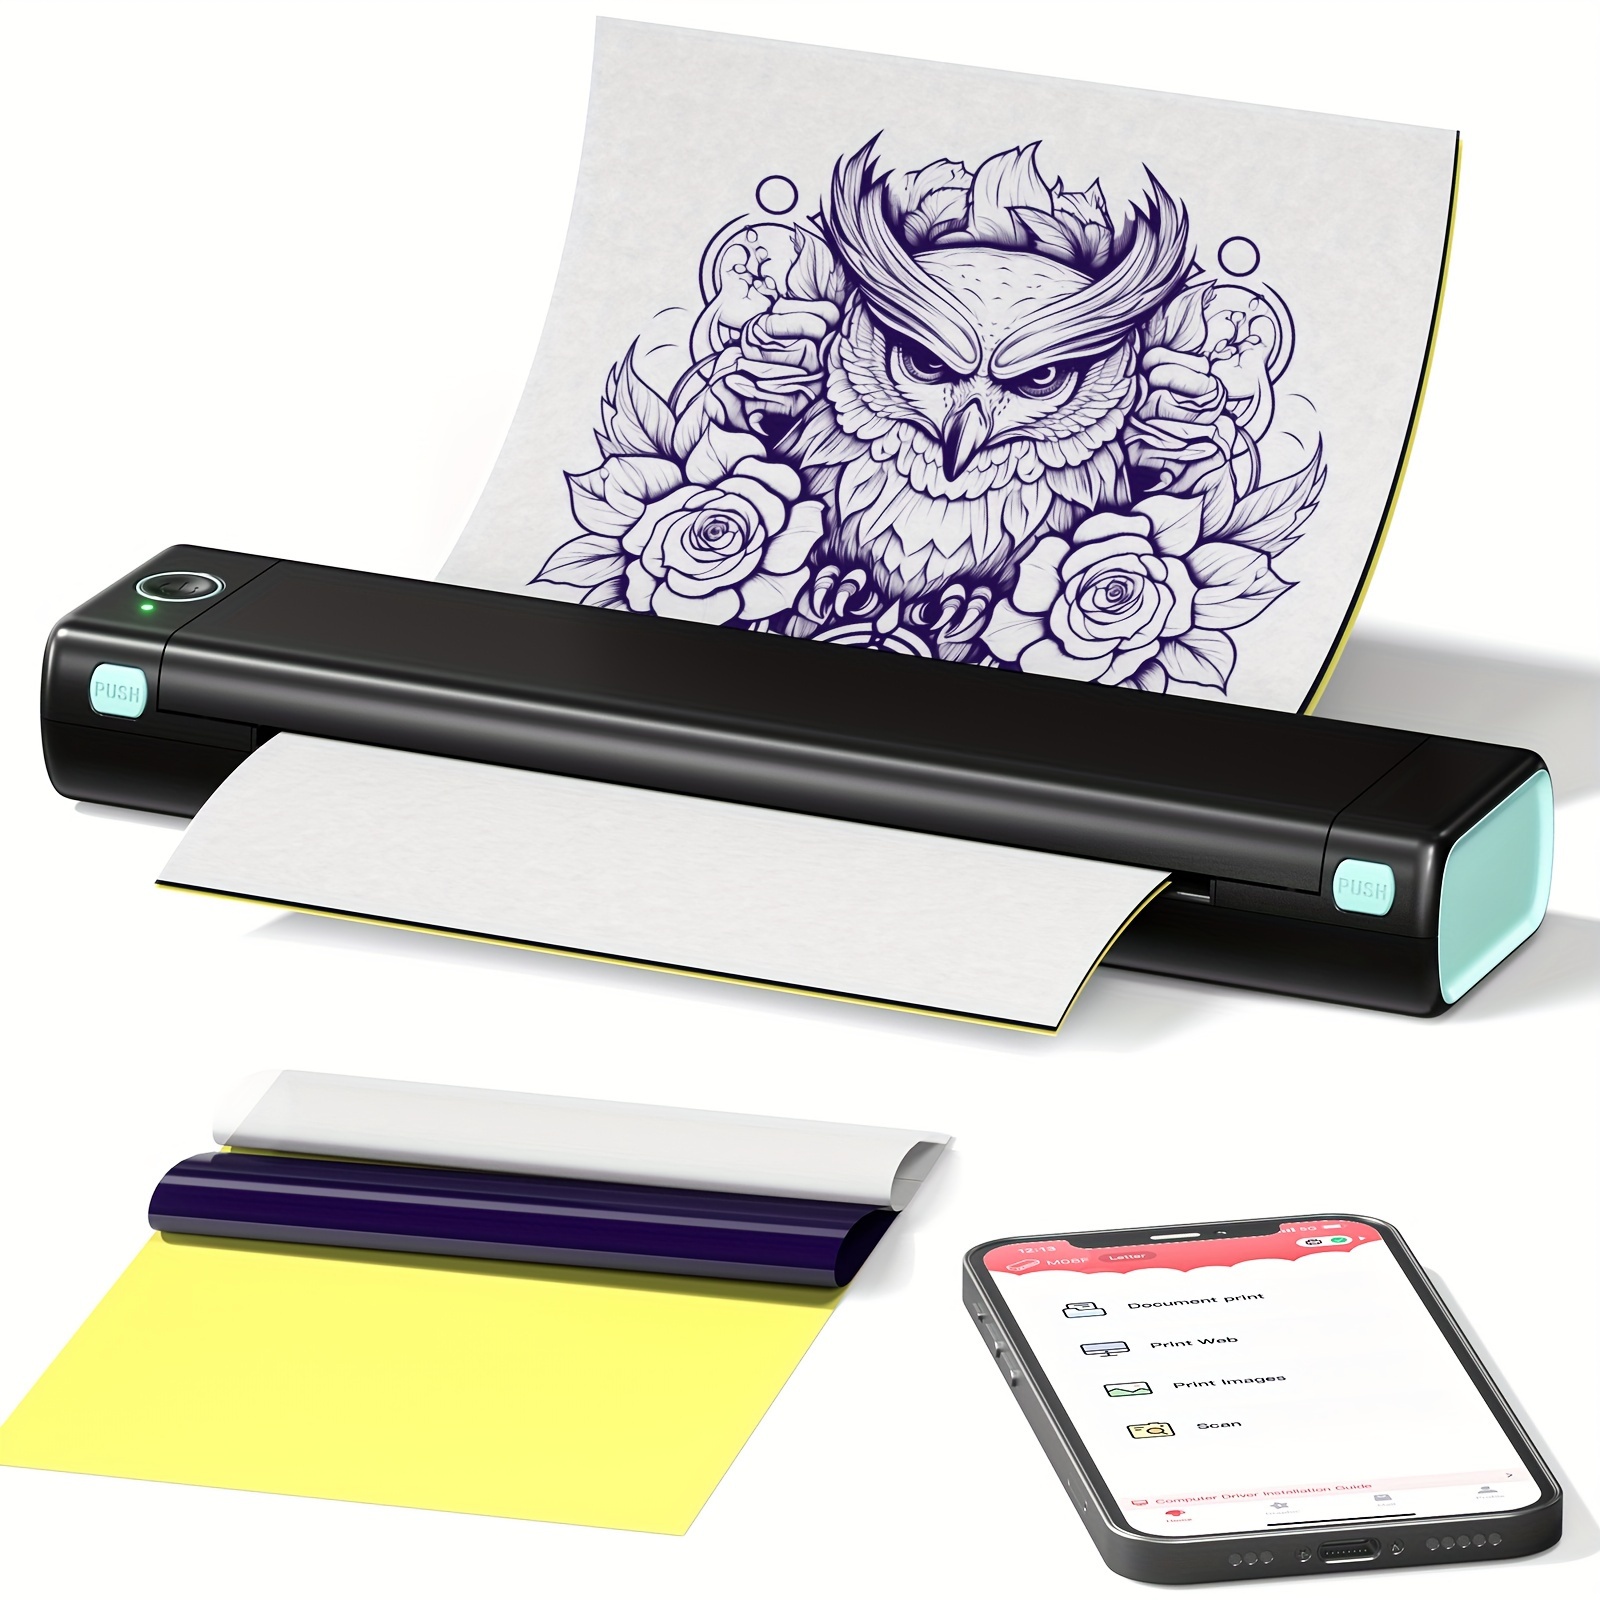 Peripage A4 Tattoo Stencil Printer for Tattooing Artists Bluetooth